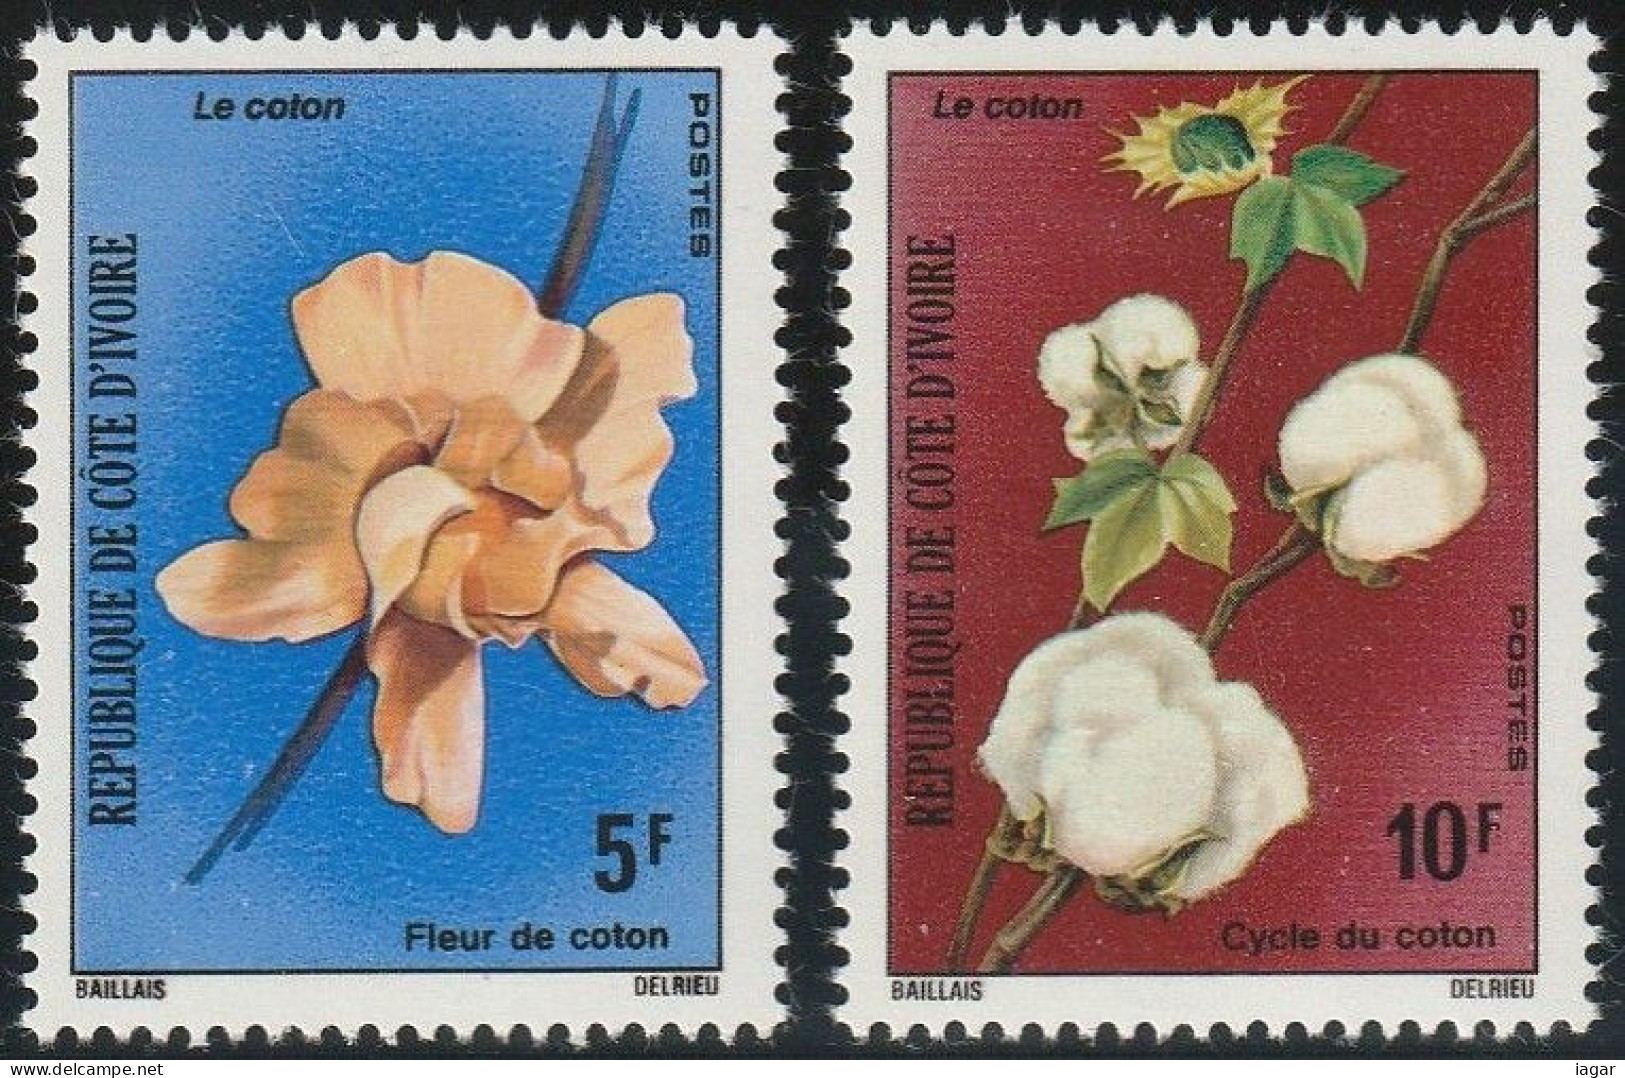 THEMATIC AGRICULTURE:  COTTON CULTIVATION, COTTON FLOWERS AND COTTON CYCLE    -   COTE D'IVOIRE - Agriculture